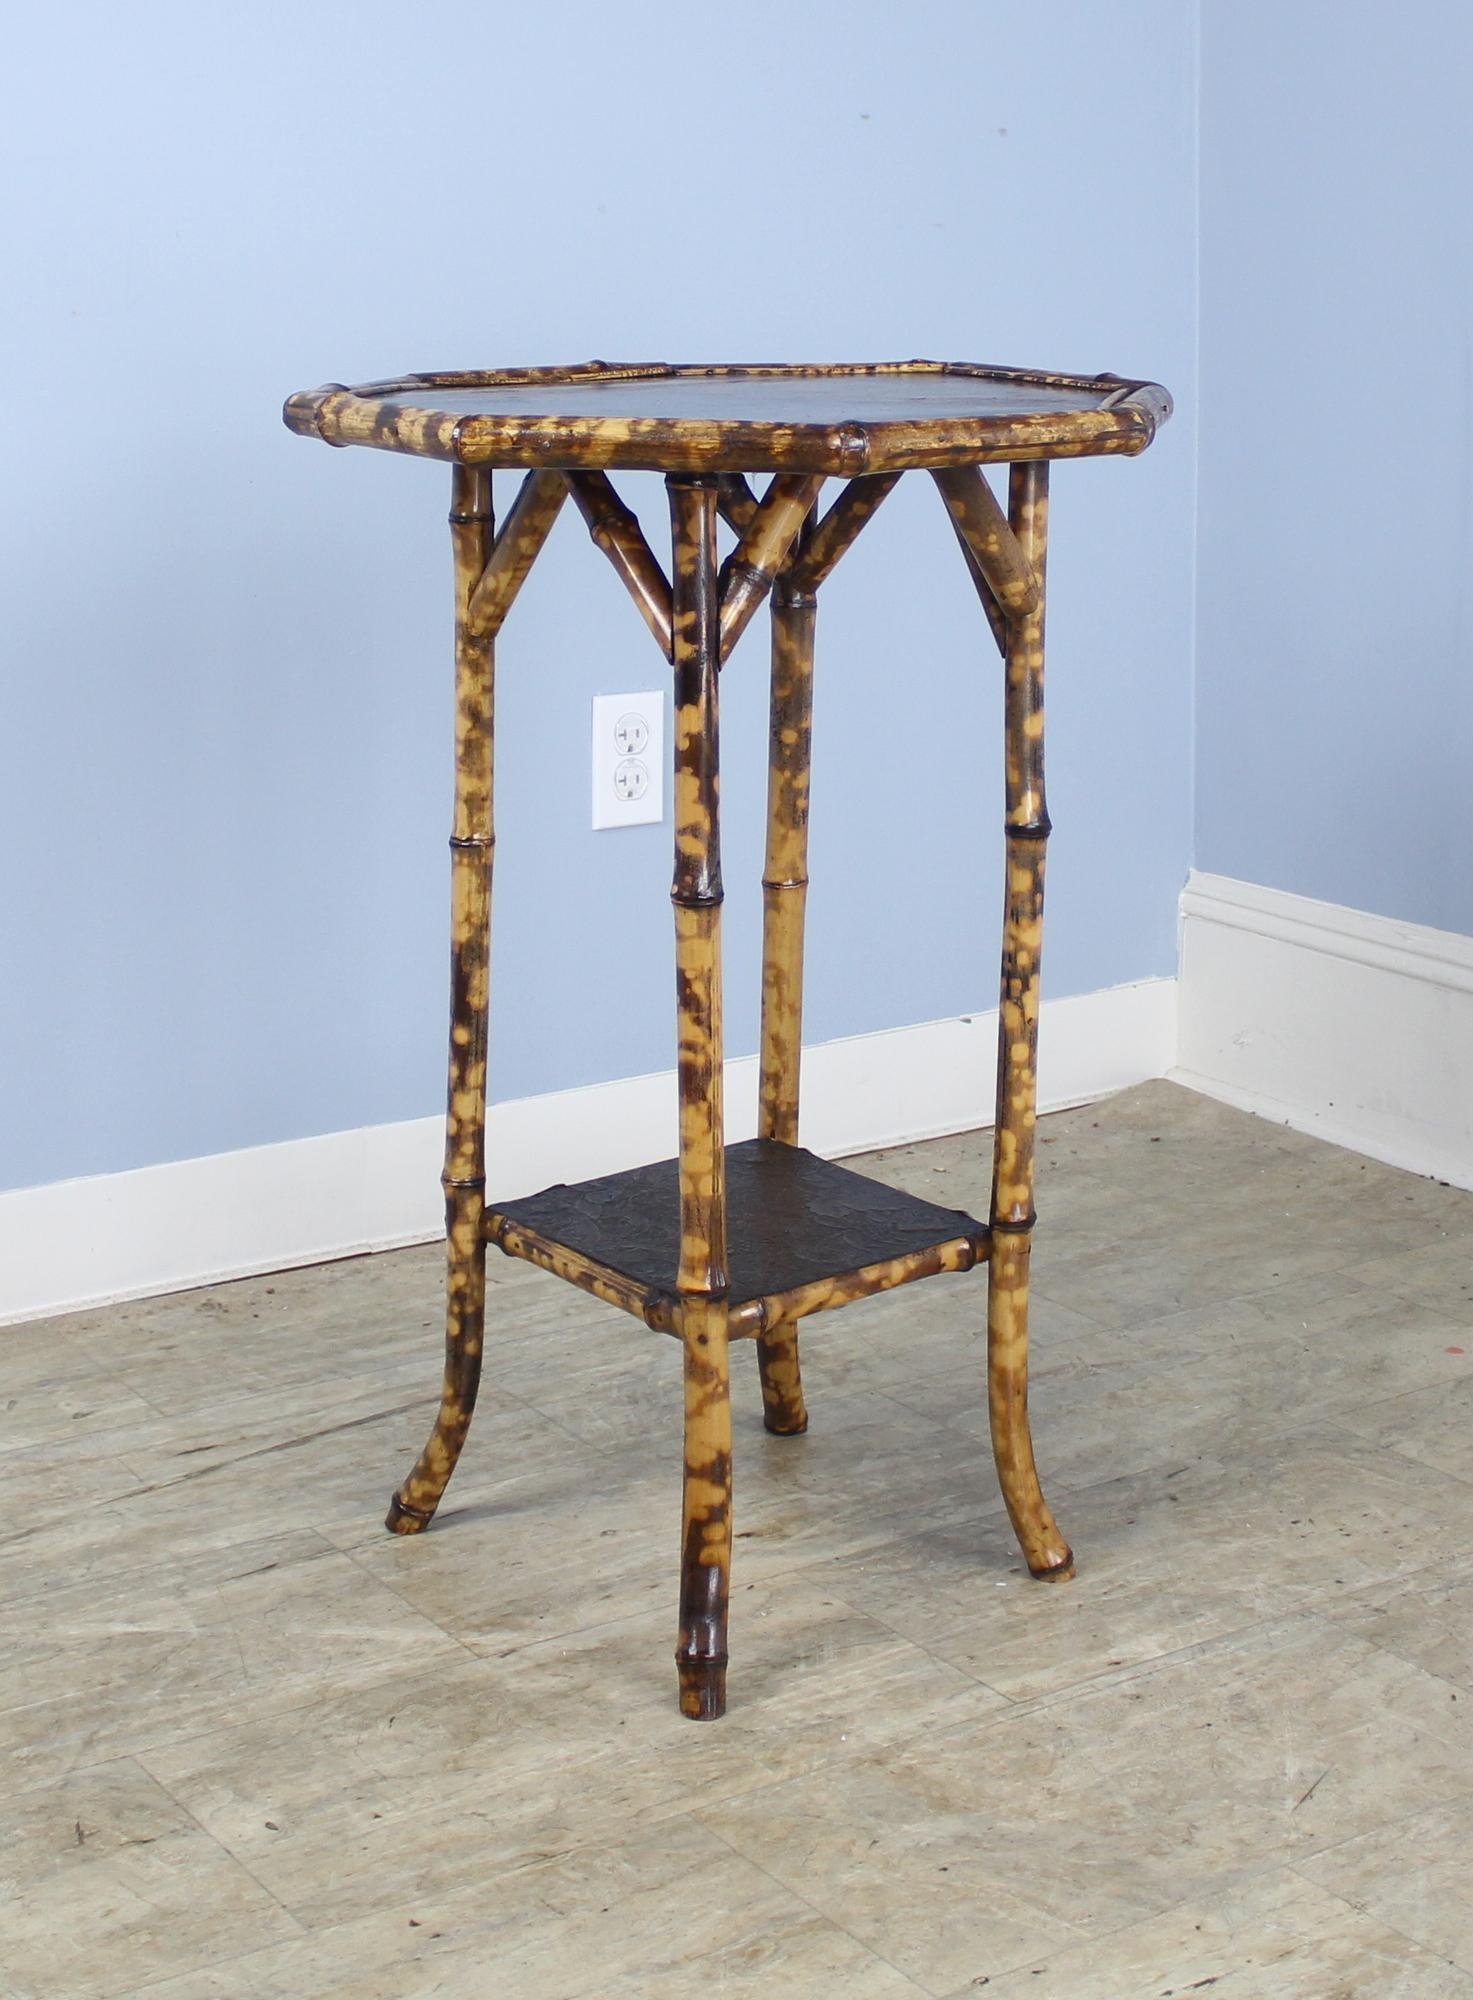 An antique English bamboo side table, with flared legs and an unusual octagonal top accented with a chinoiserie lacquered top with a floral and wildlife motif. The bottom shelf is covered in stylish pressed leather. The bamboo, vividly painted, is